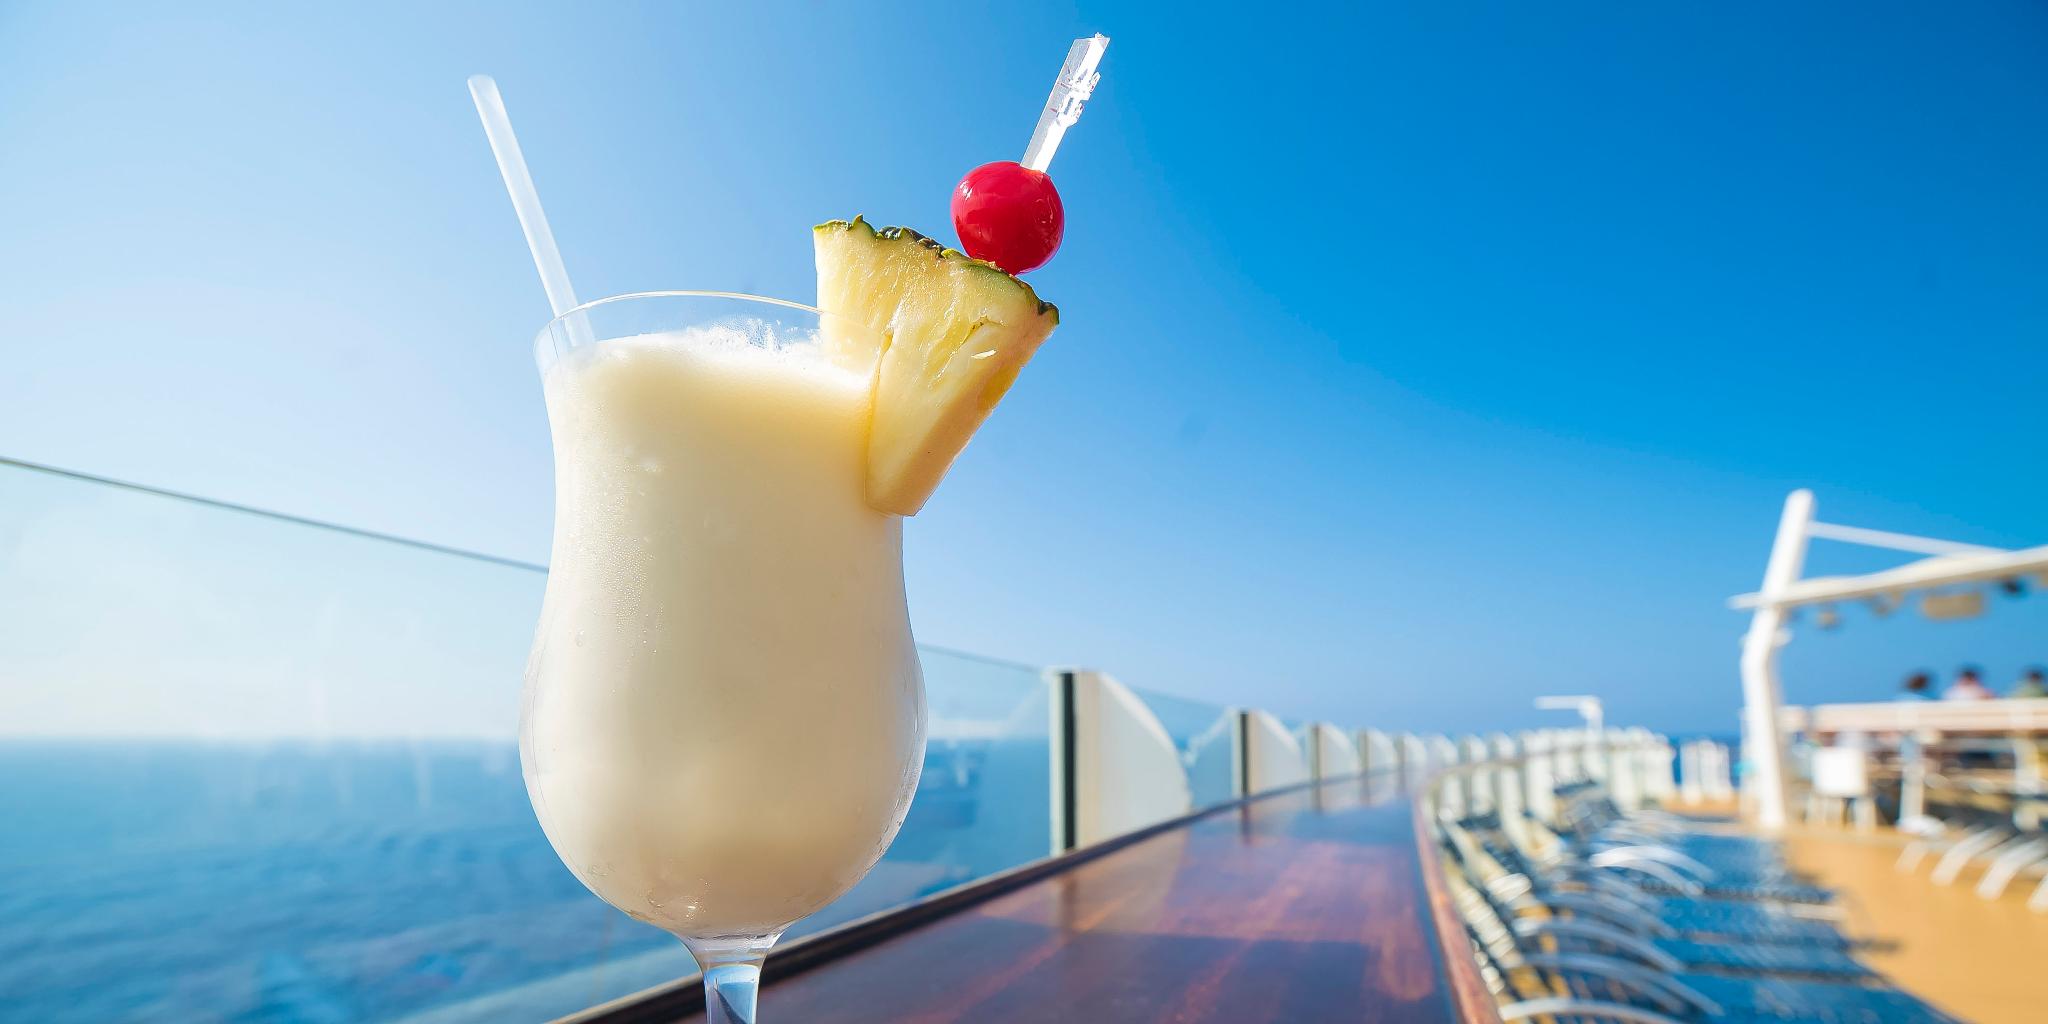 Spotted: Royal Caribbean offering up to 30% off drink packages for this